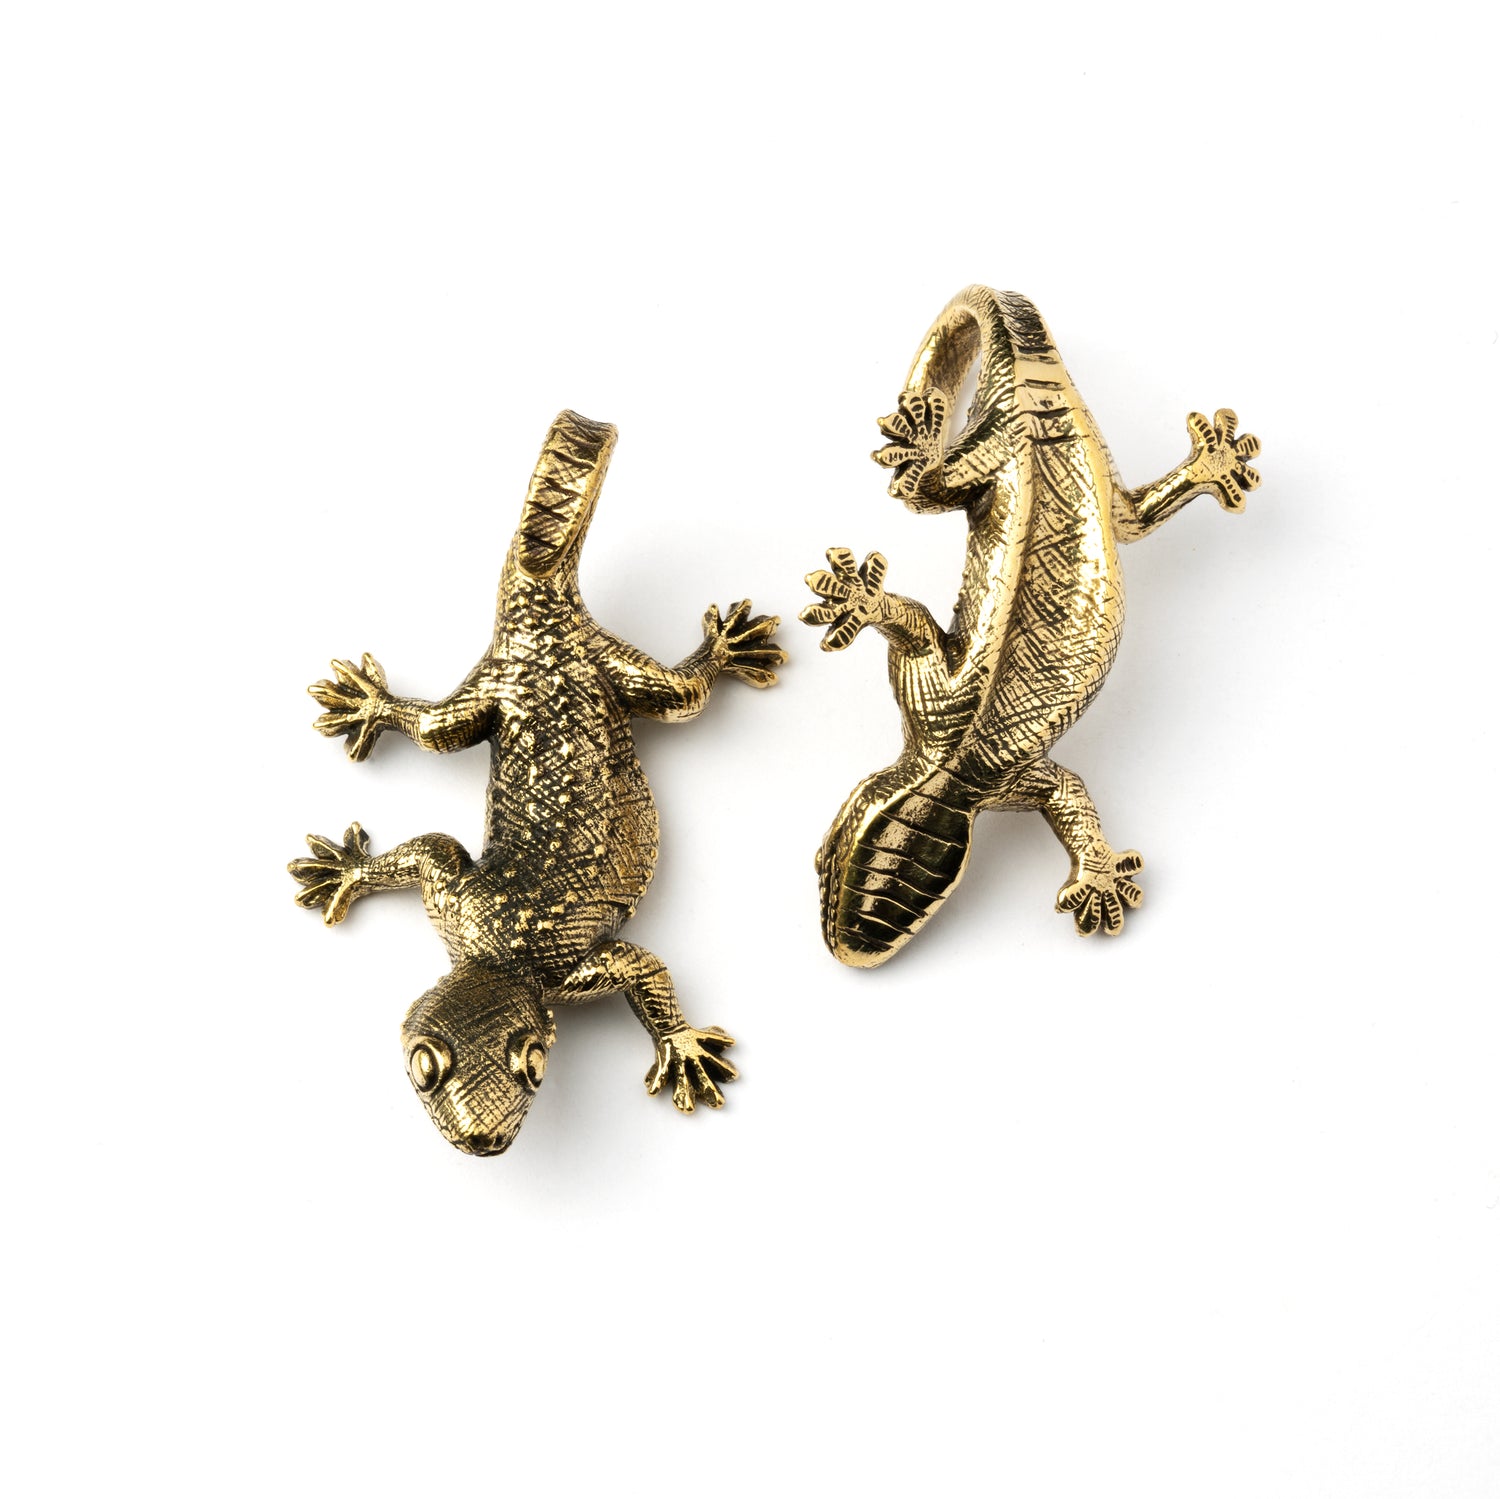 pair of gold brass lizard ear hangers front and back view